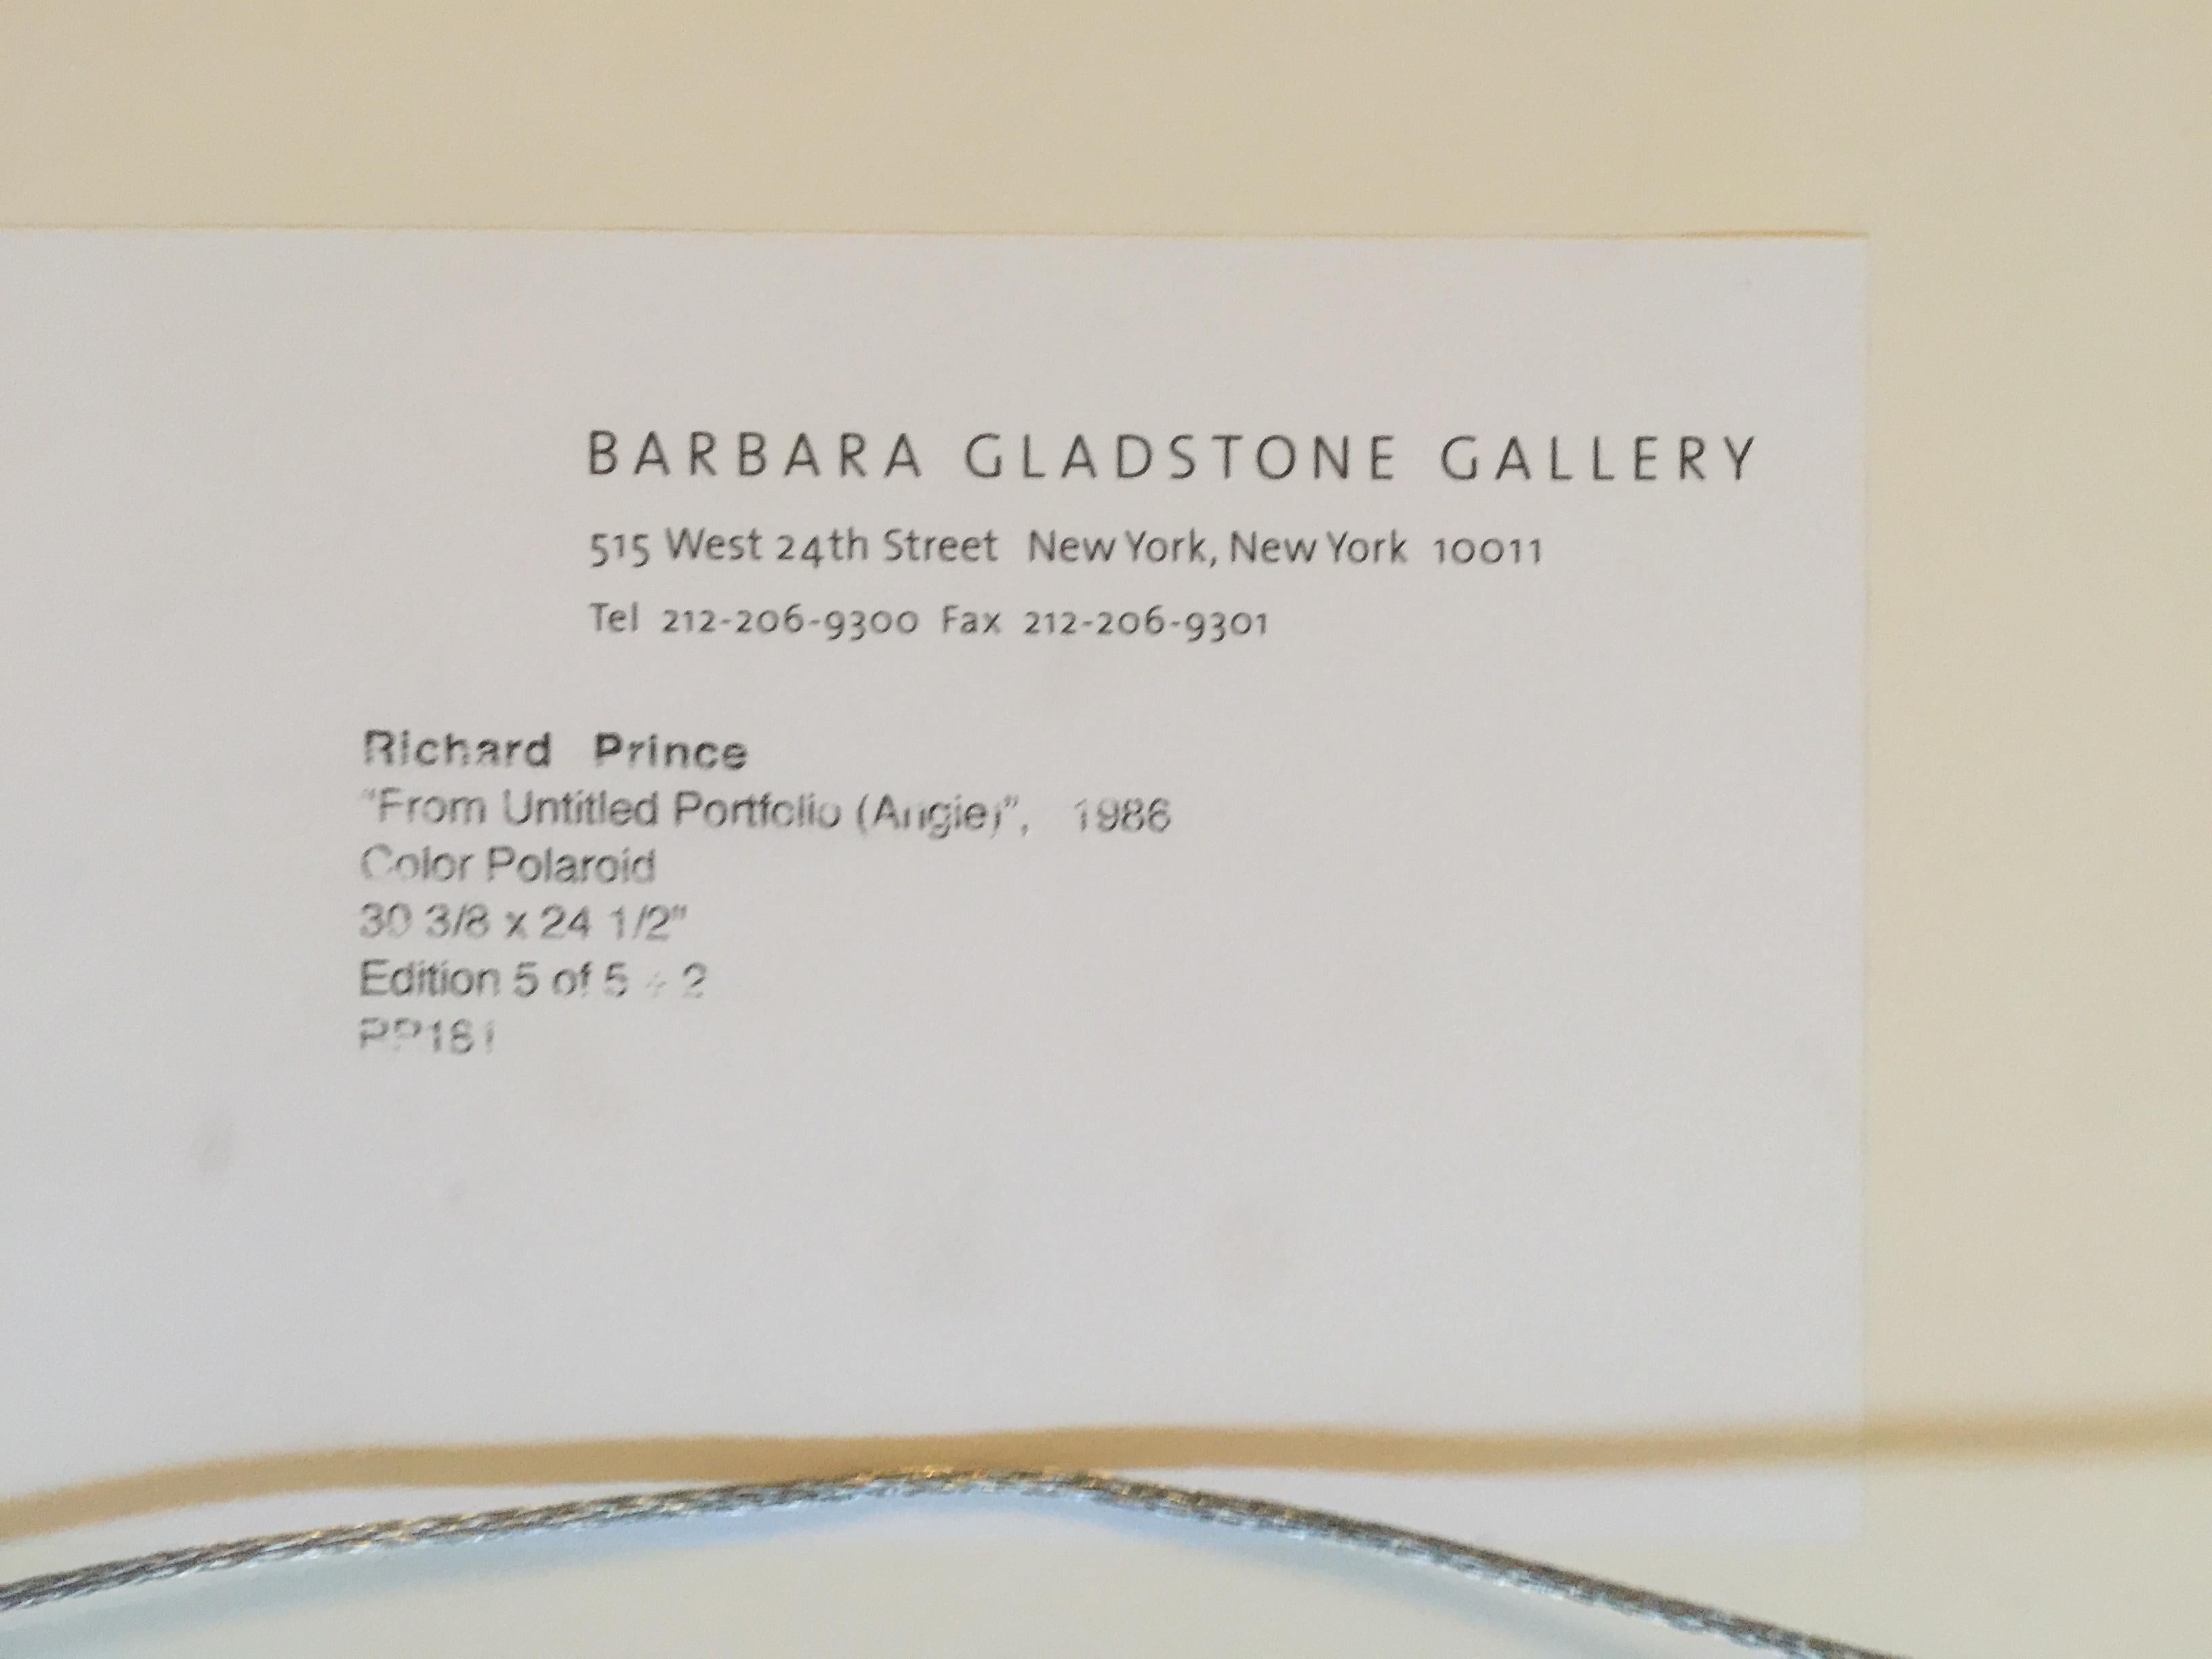 Richard Prince
Angie Dickenson (Angie from Untitled Portfolio) from the estate of Vera G. List, 1986
Large Color Polaroid (w/Barbara Gladstone & Sotheby's Gallery Labels)
Signed and numbered 5/5 on front. 
Bears Barbara Gladstone Gallery label